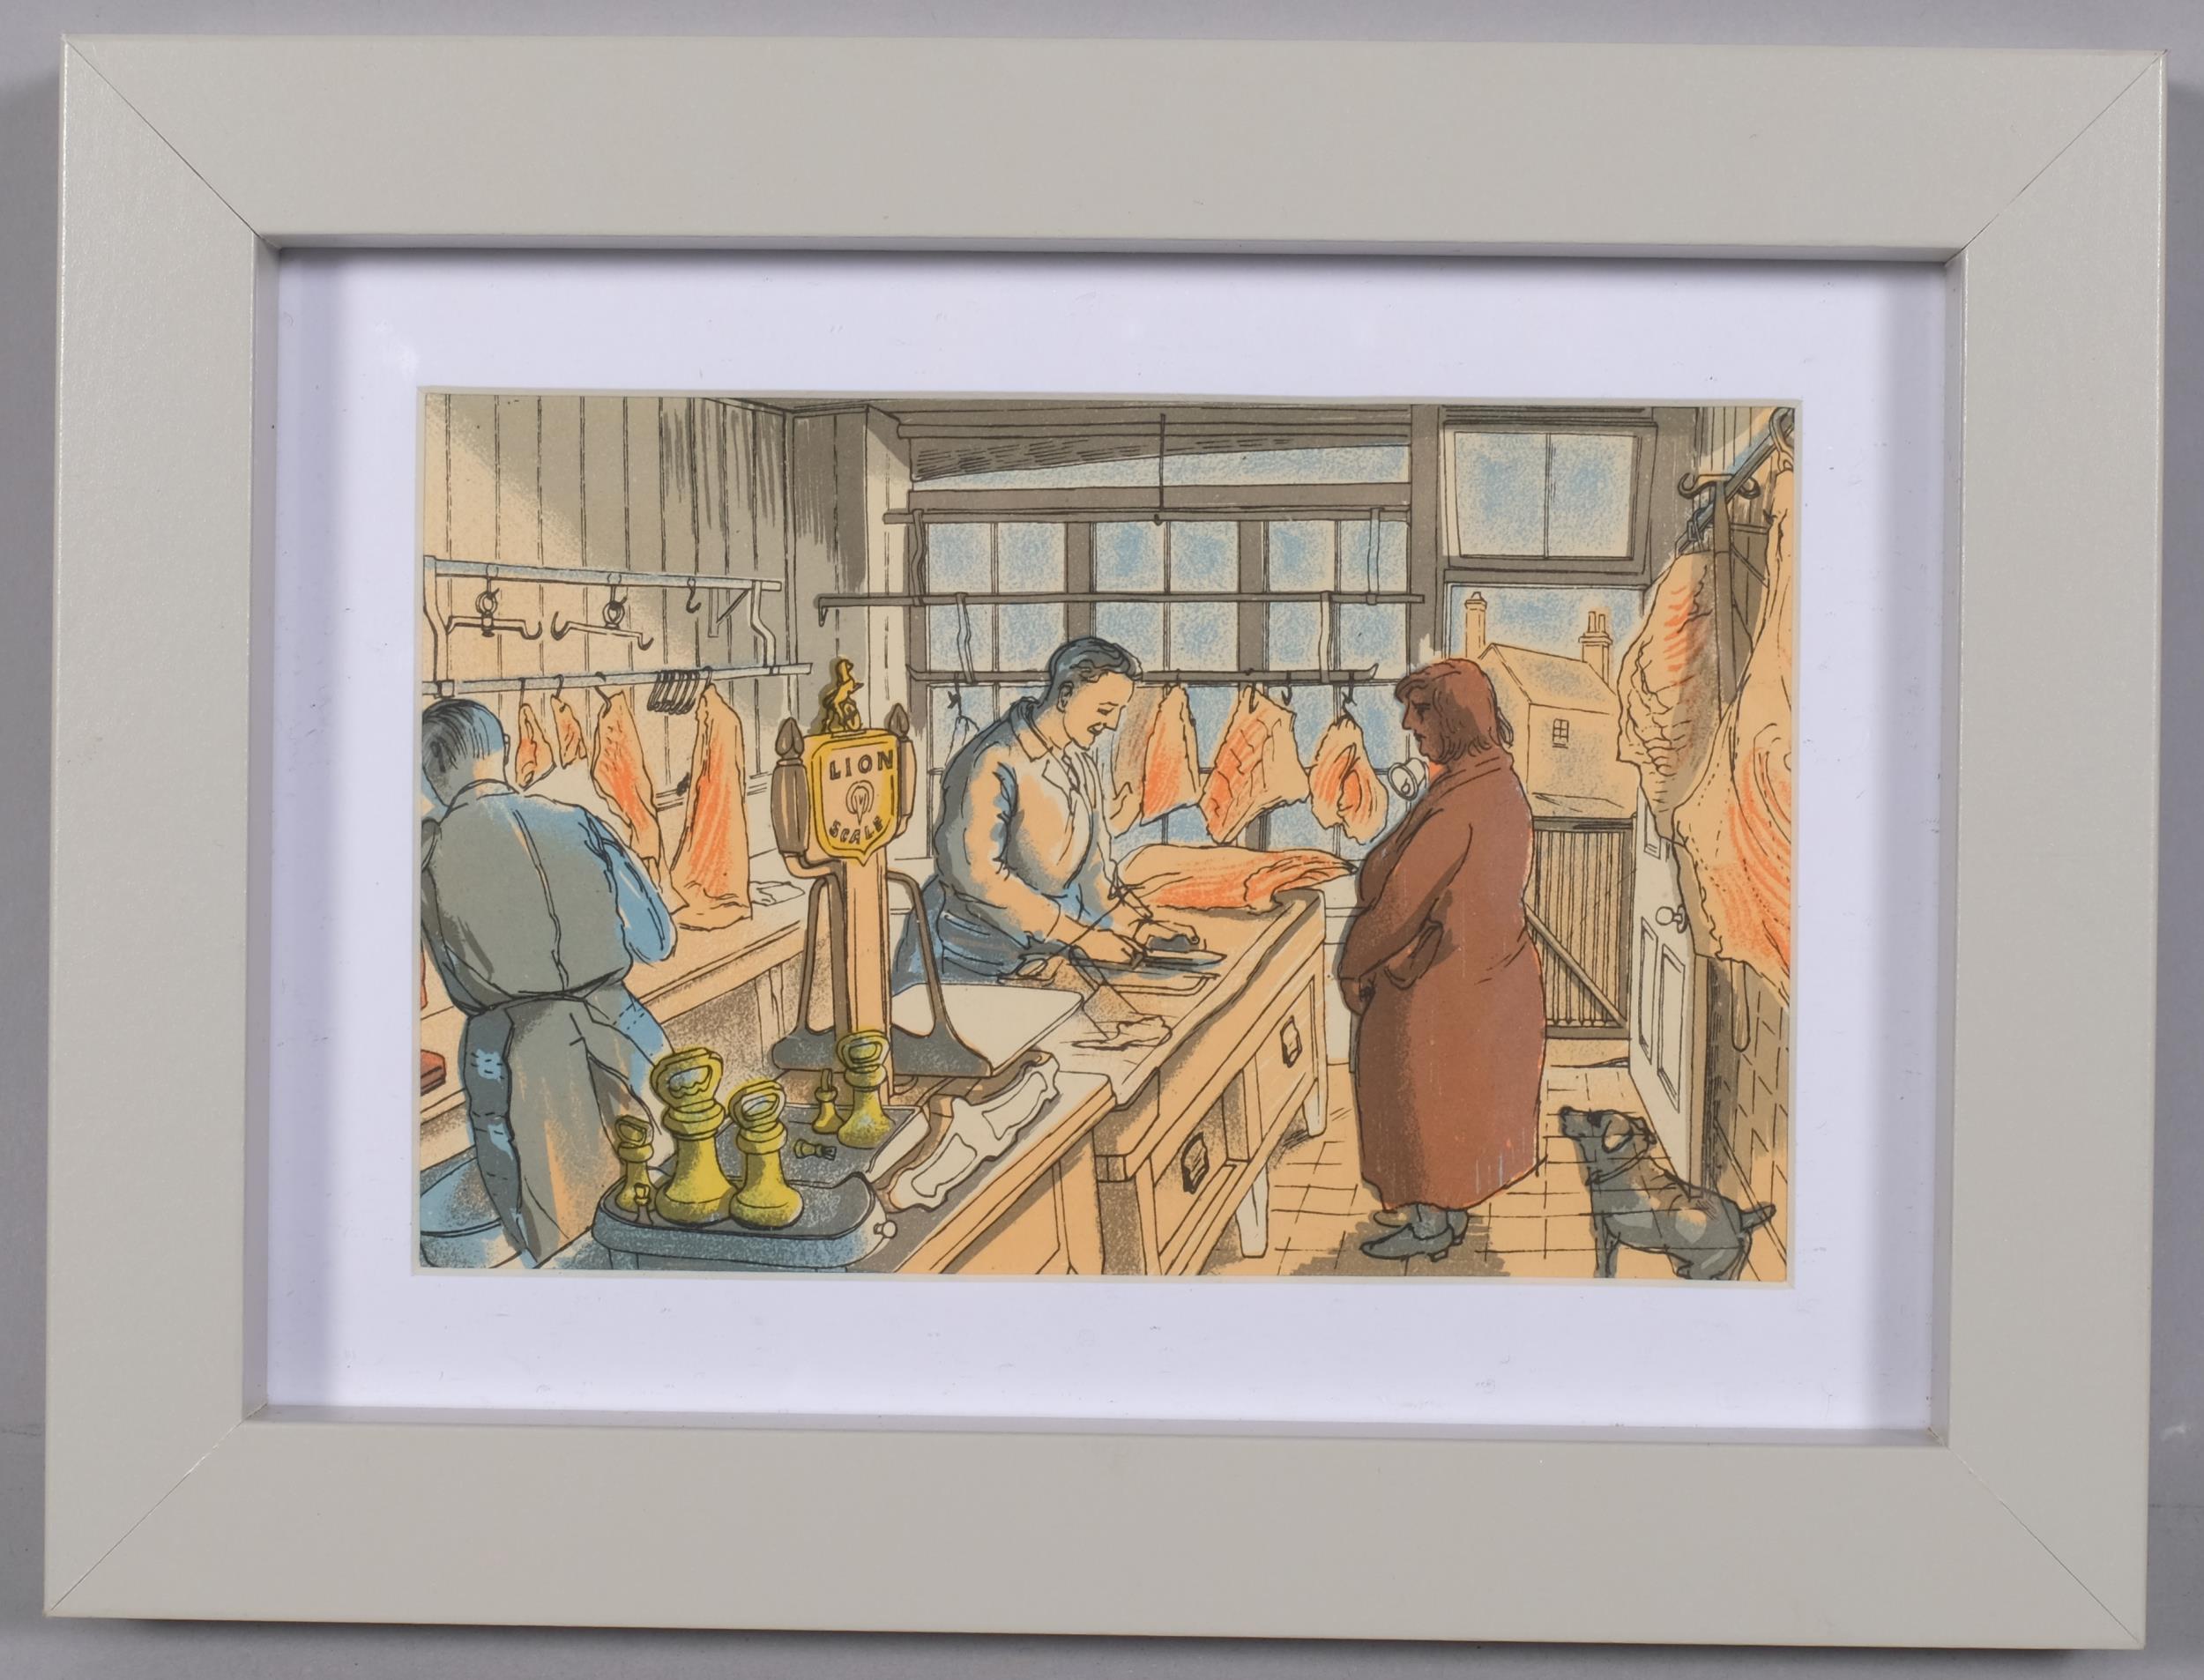 Edward Bawden (1903 - 1989), The Butcher/The Tailor, colour lithograph, published by Curwen Press